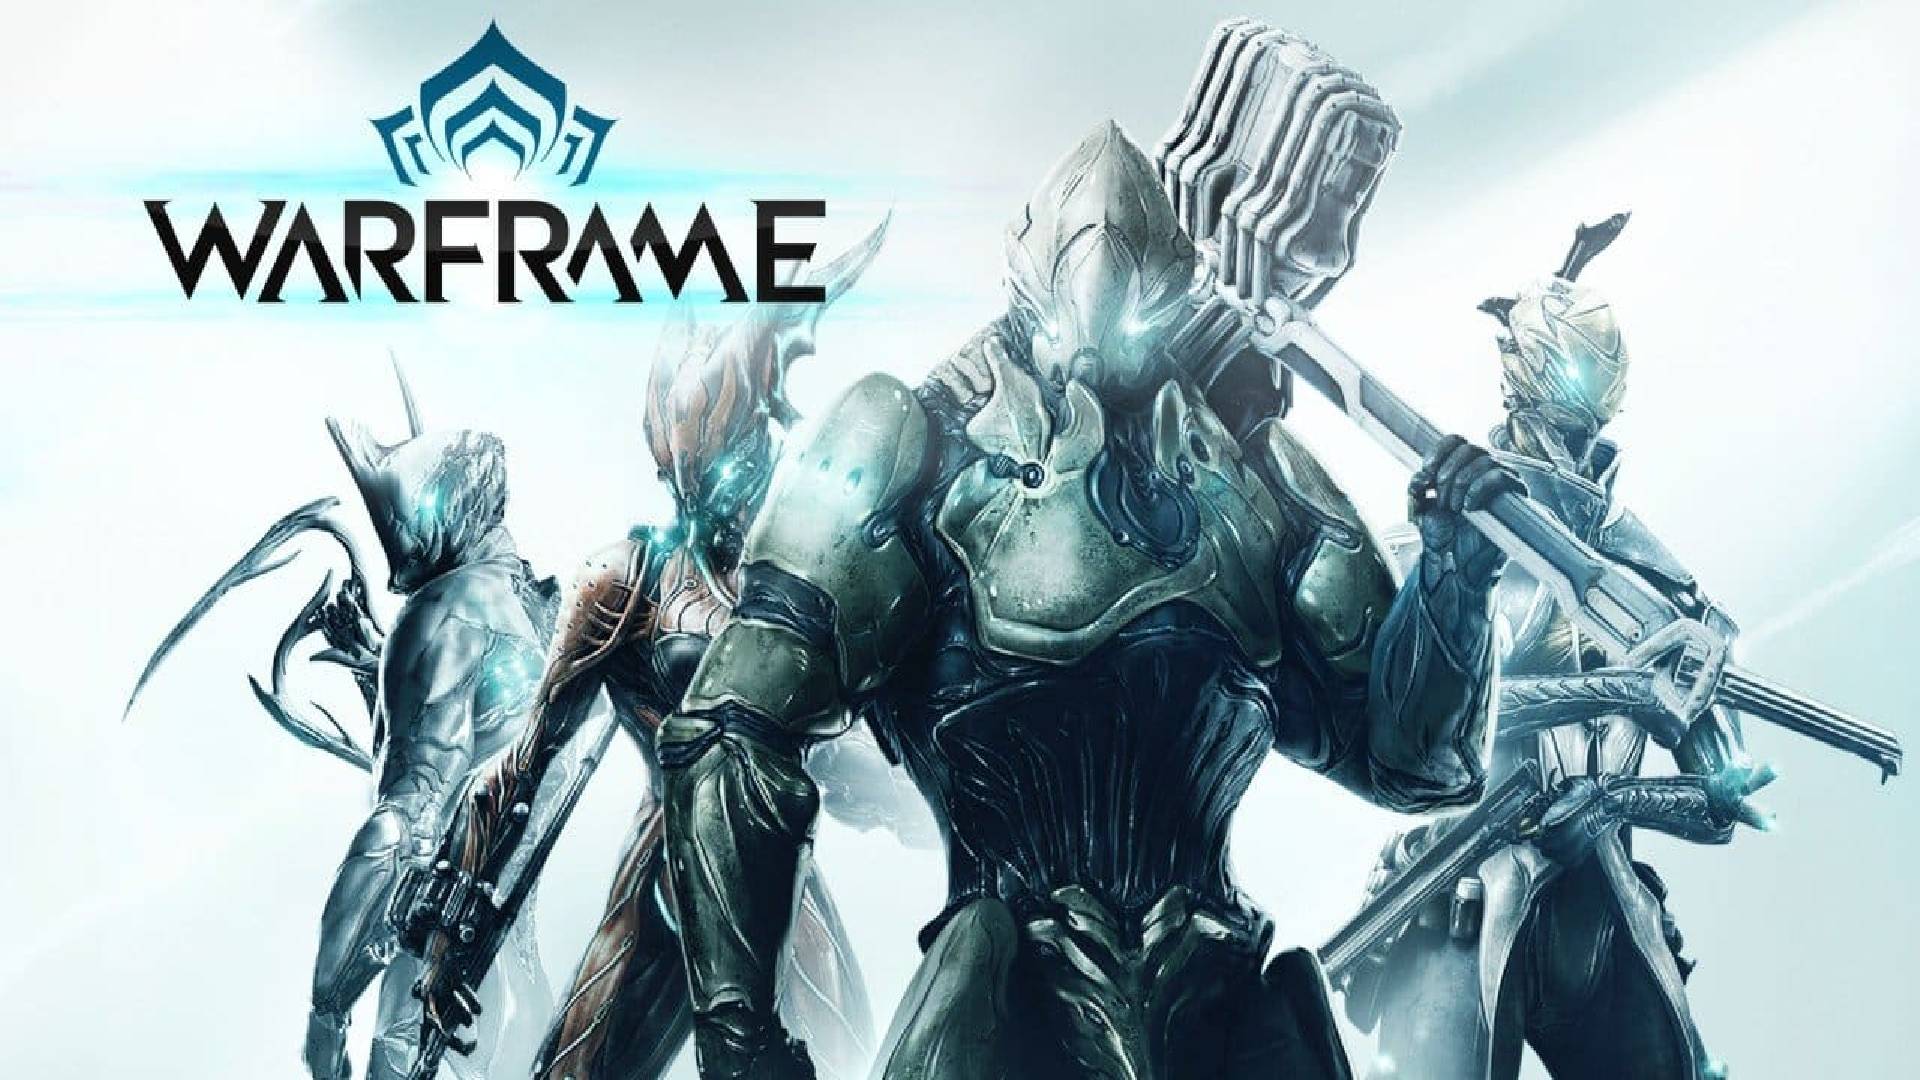 The characters of Warframe are shown holding various weapons looking forward